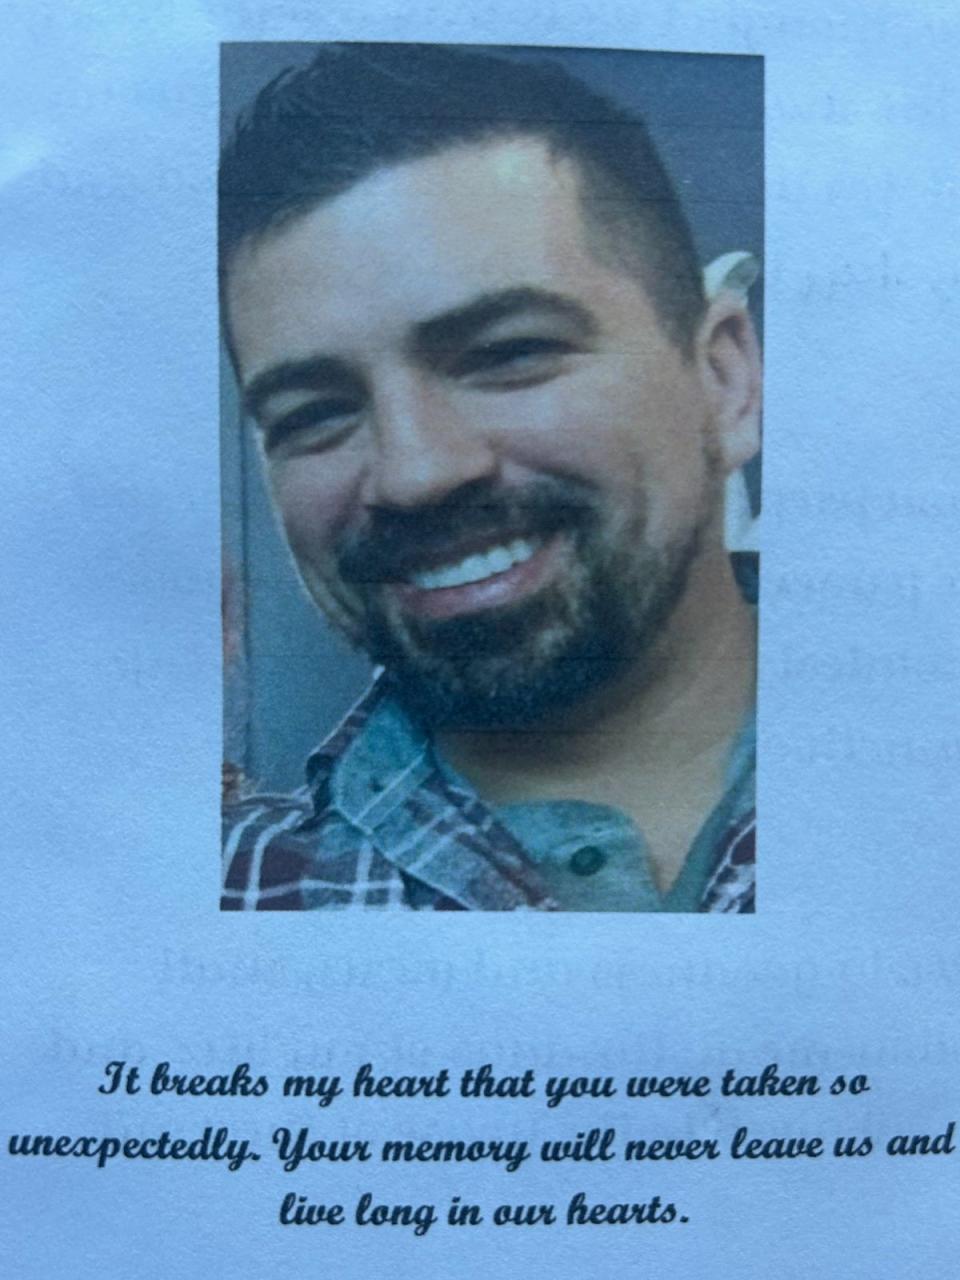 Joshua Dean, 45, became a whistleblower after working as an auditor at Spirit AeroSystems in Wichita -- but died 30 April after a sudden illness. A celebration of life was held for him last week in Kansas (Sheila Flynn for The Independent)